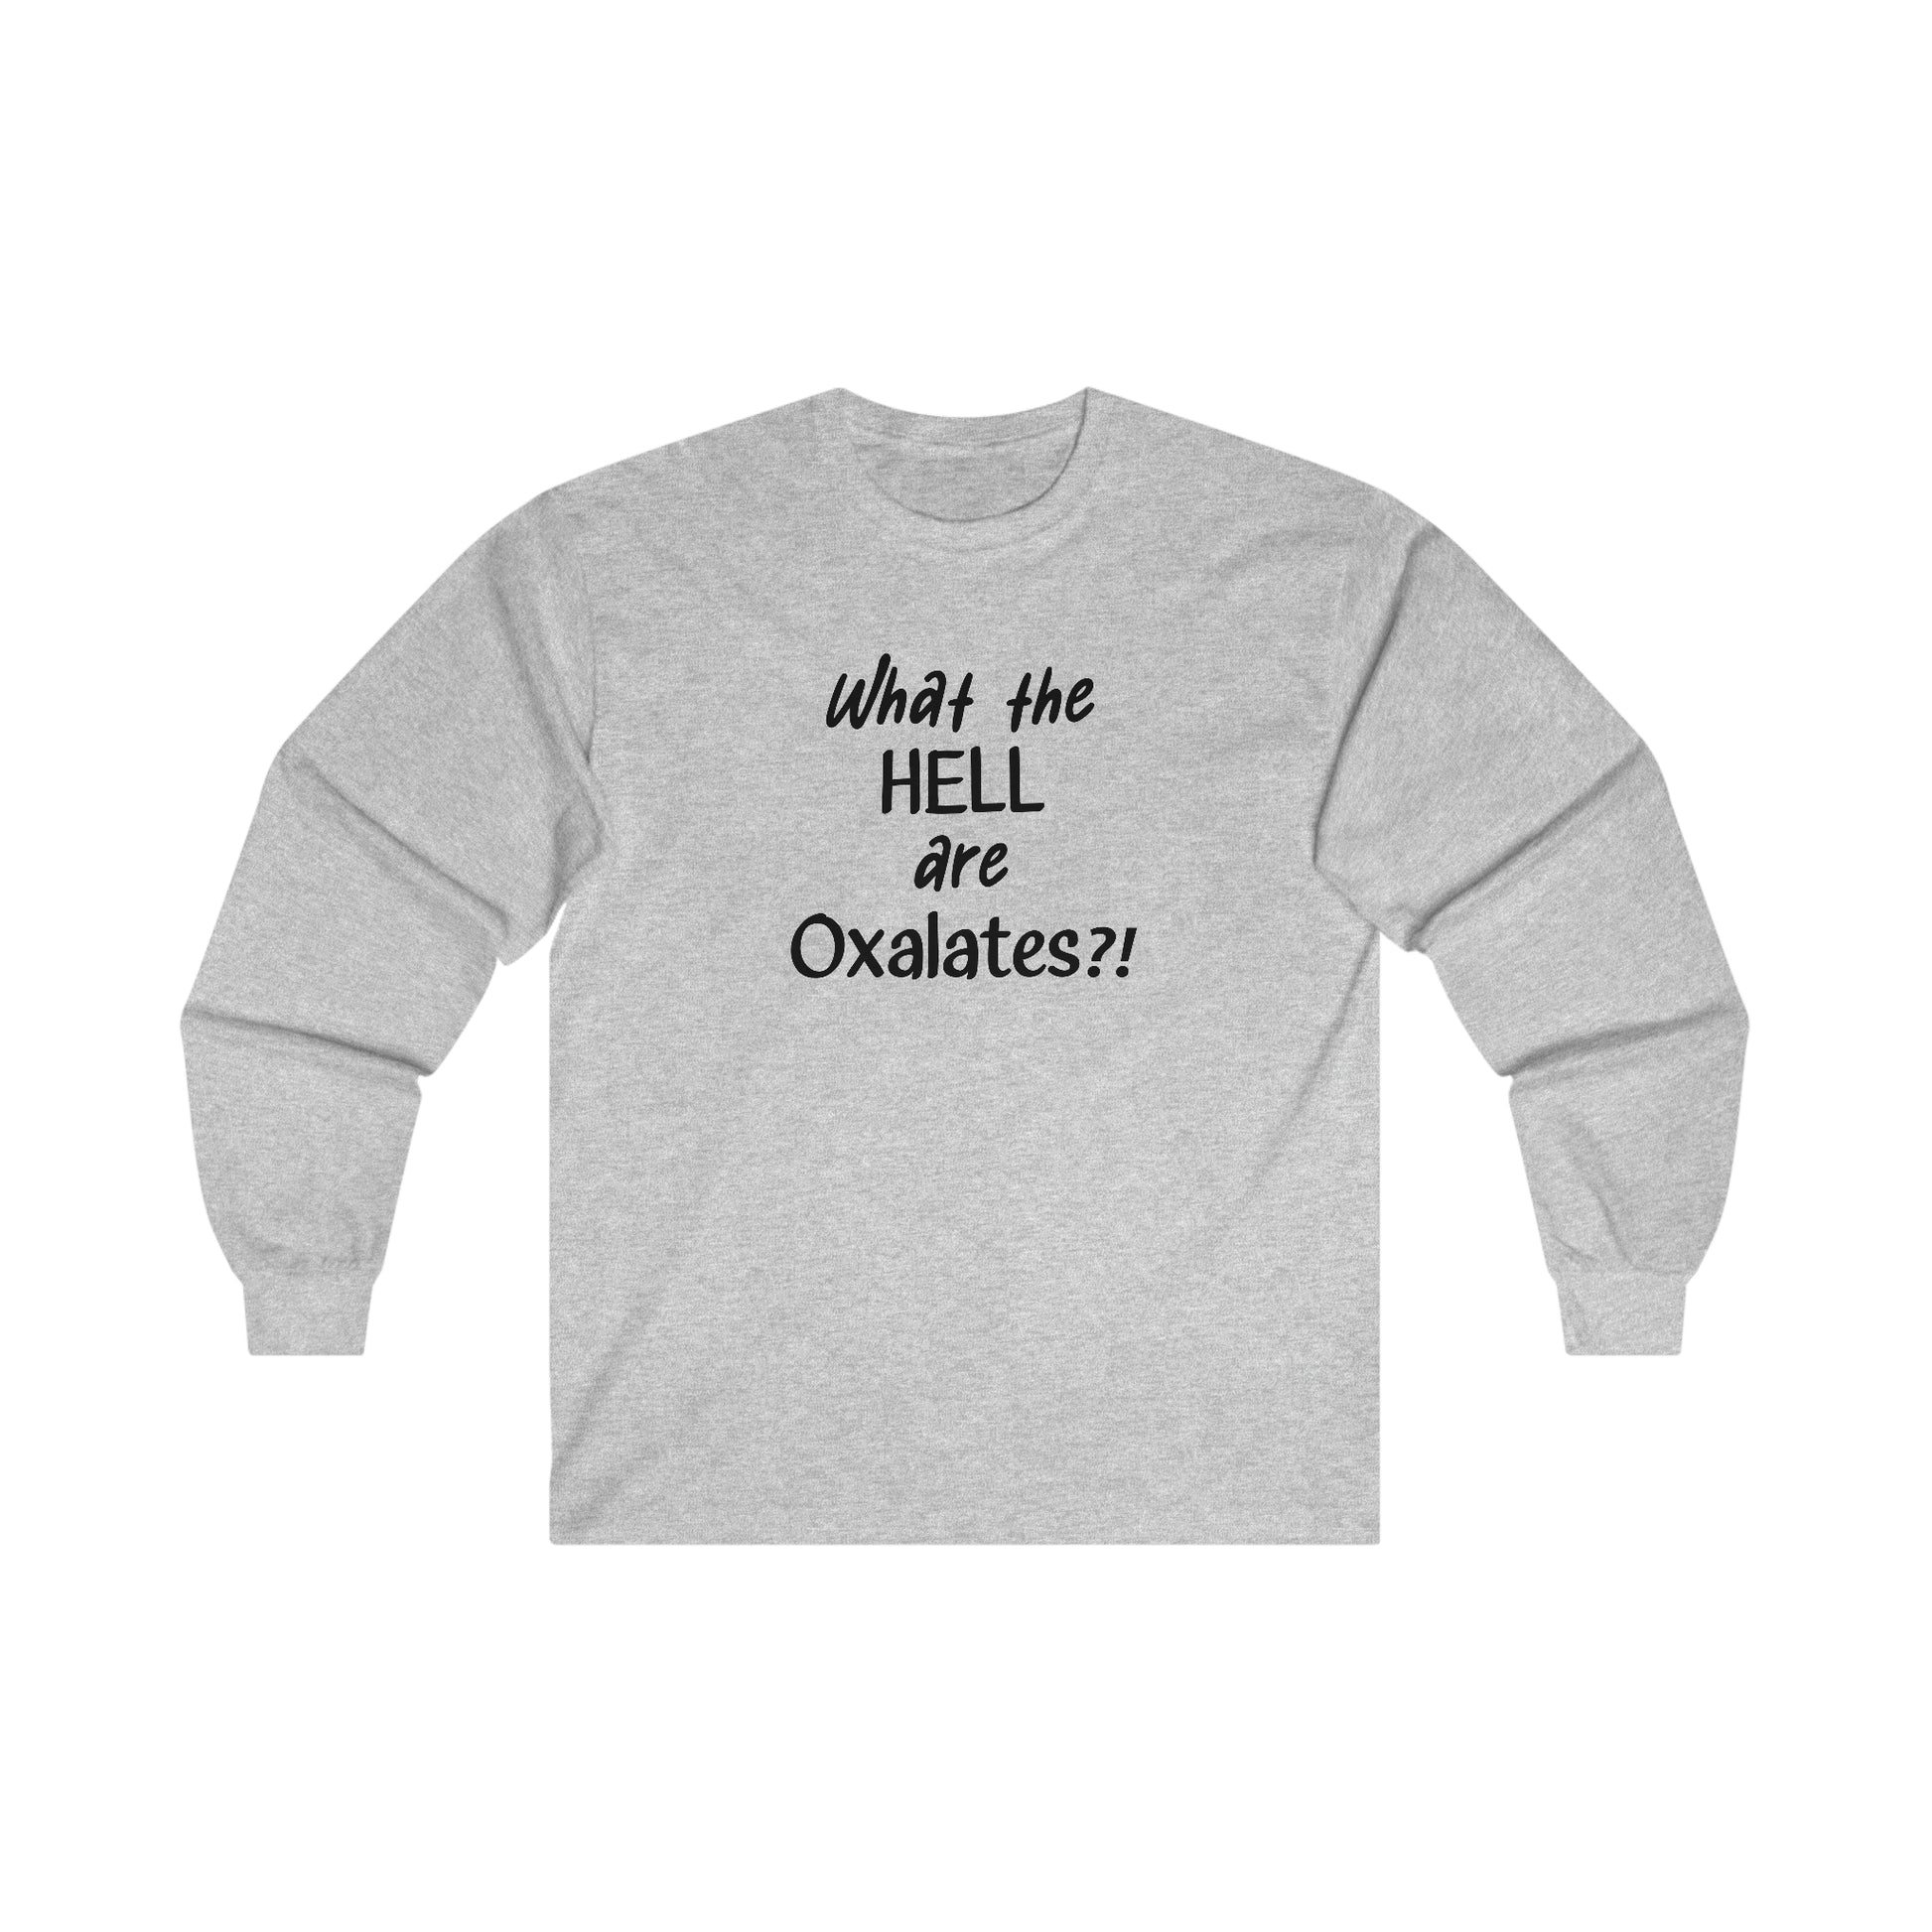 What Are Oxalates Long Sleeve Pullover Shirt